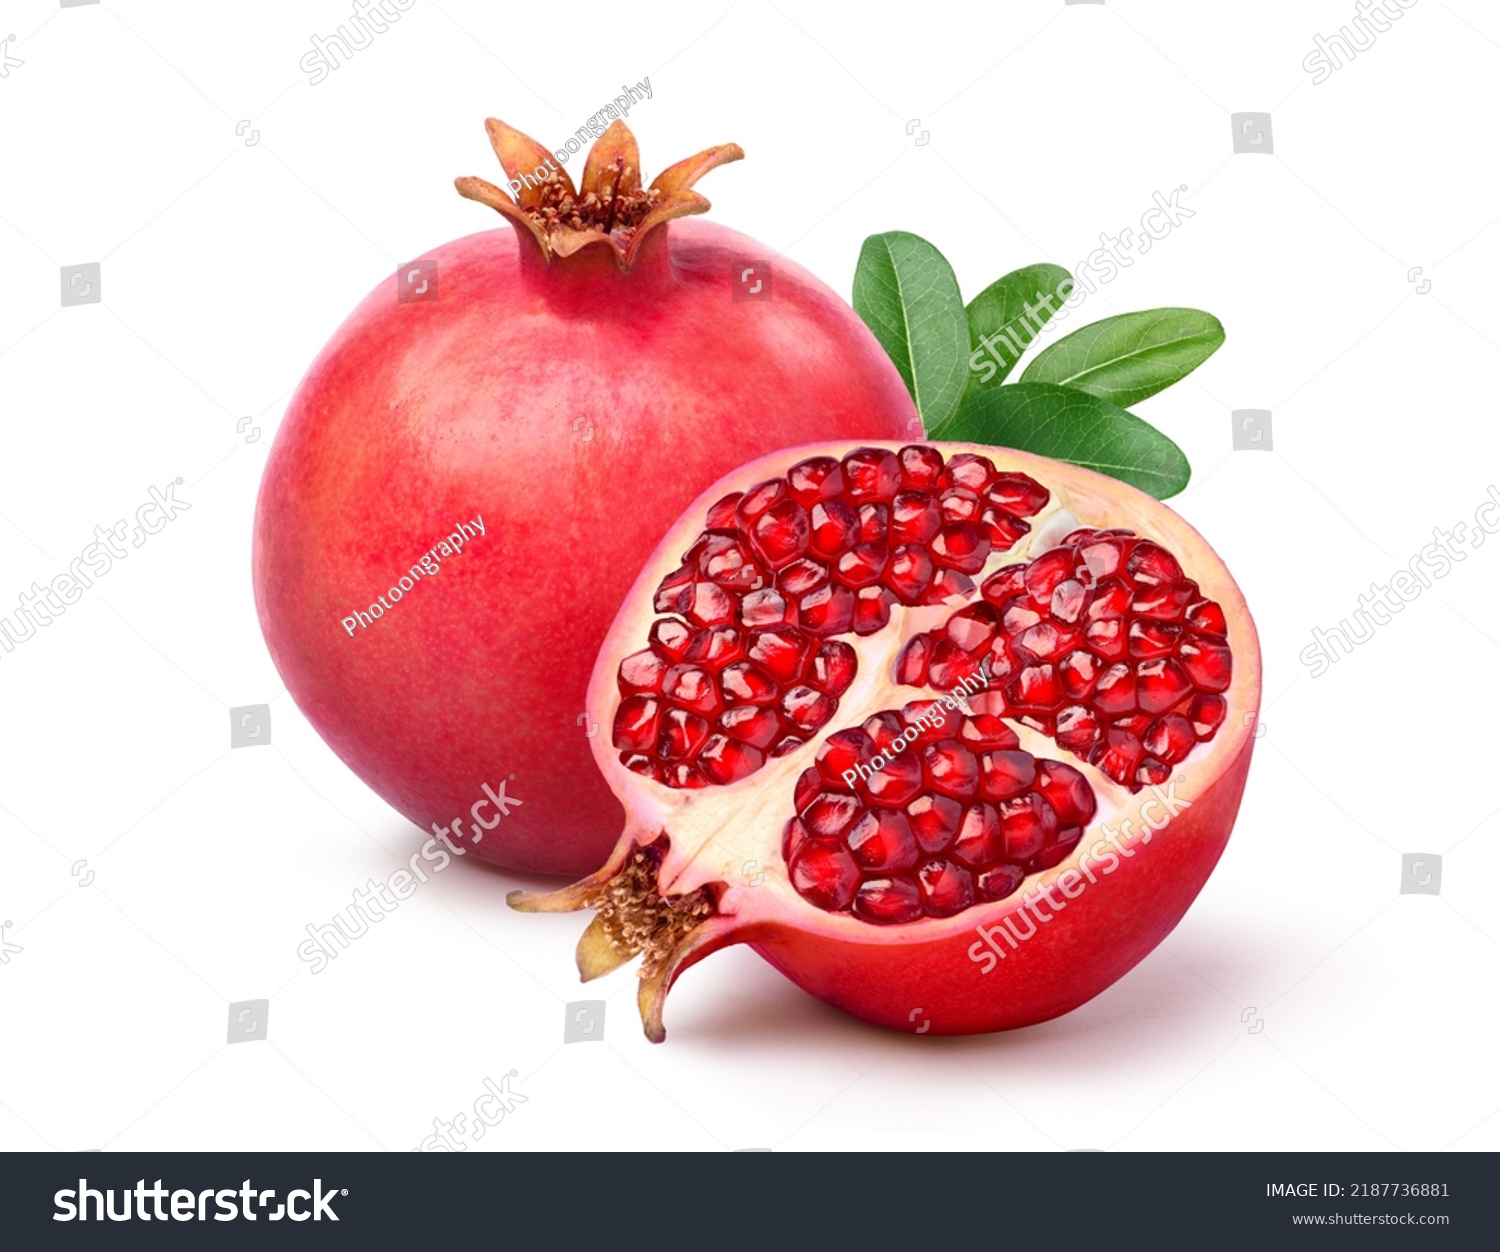 Fresh ripe pomegranate with cut in half isolated on white background. Clipping path. #2187736881